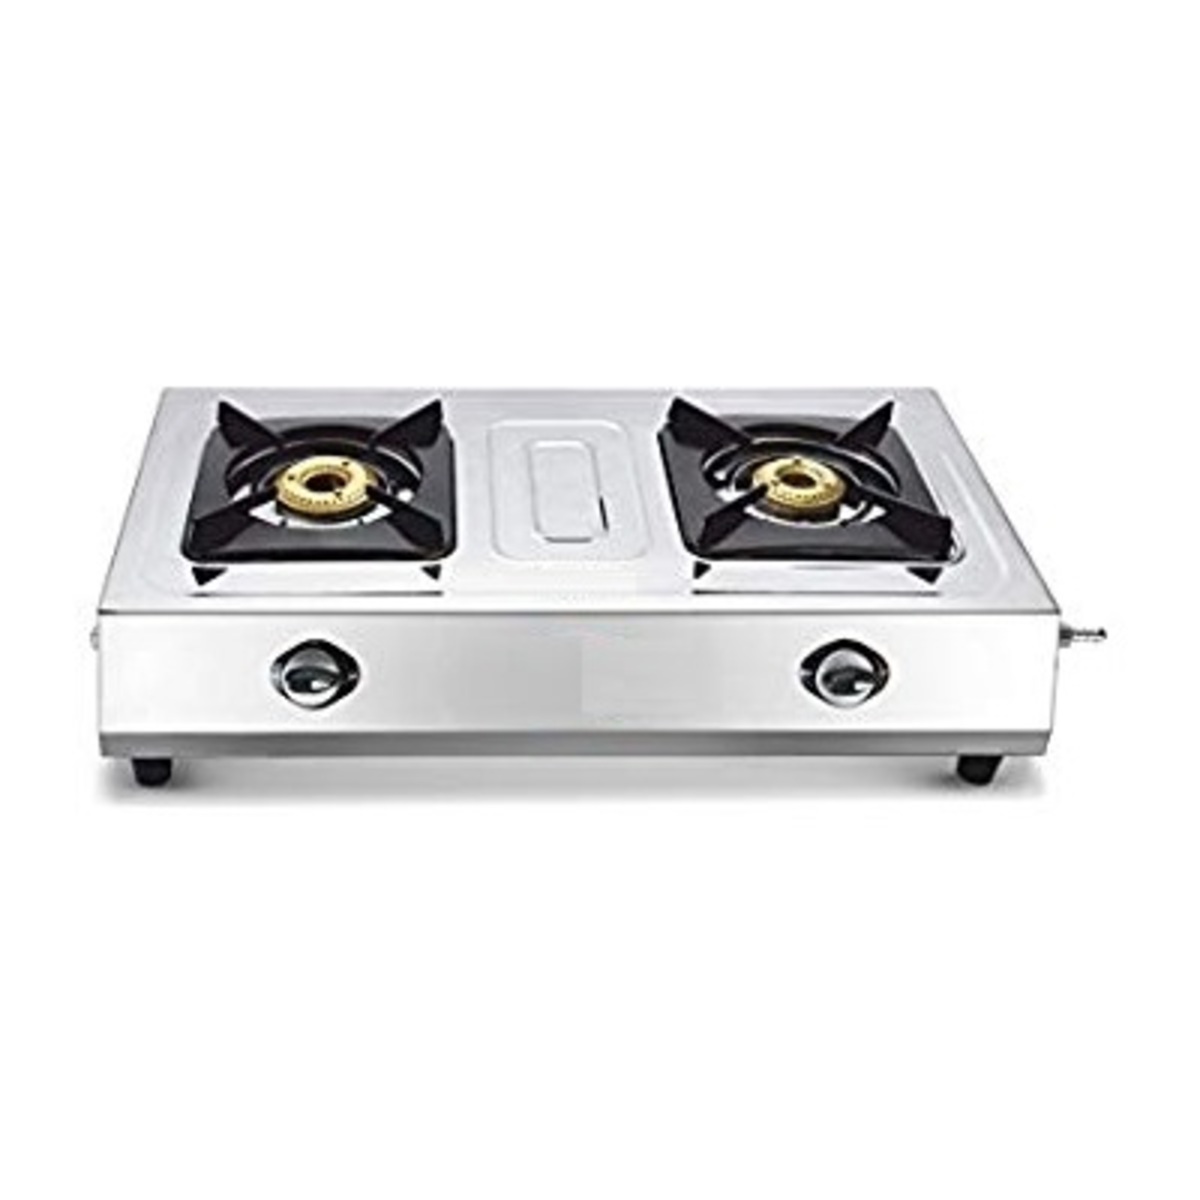 Premier Gas Stove Stainless Steel Chic 2Burner